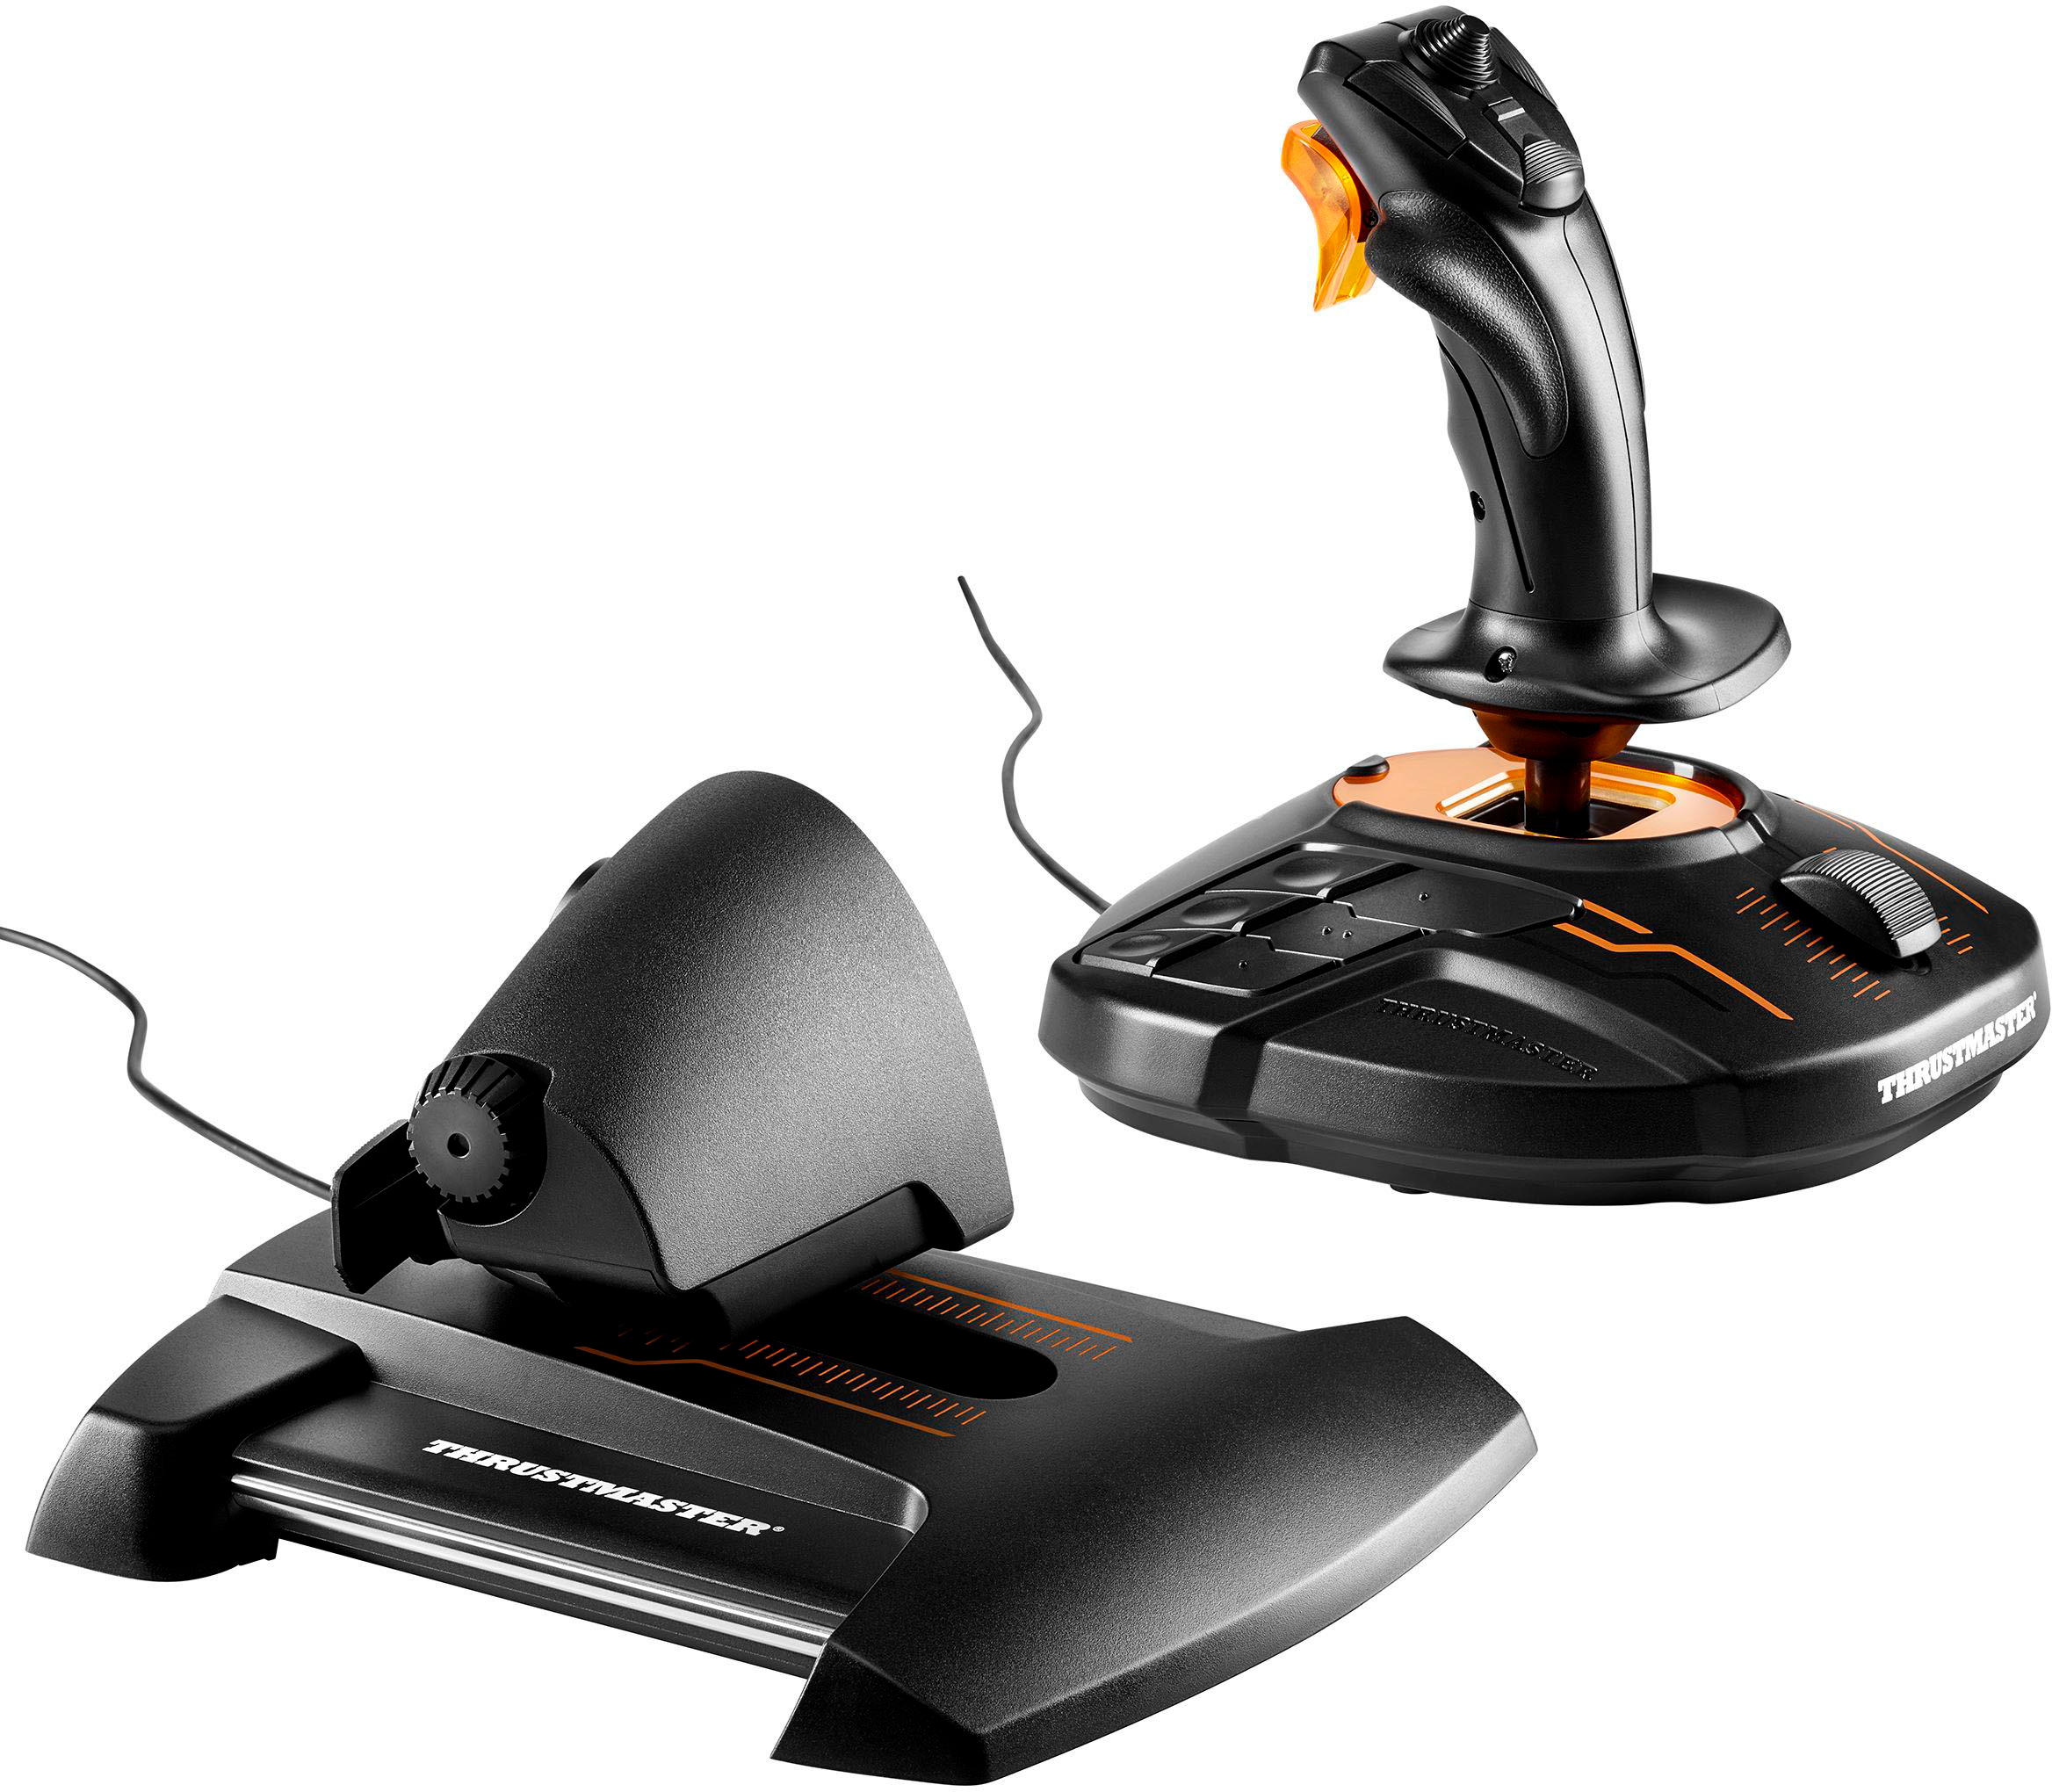 Thrustmaster T16000M FCS HOTAS for PC Black - Best Buy